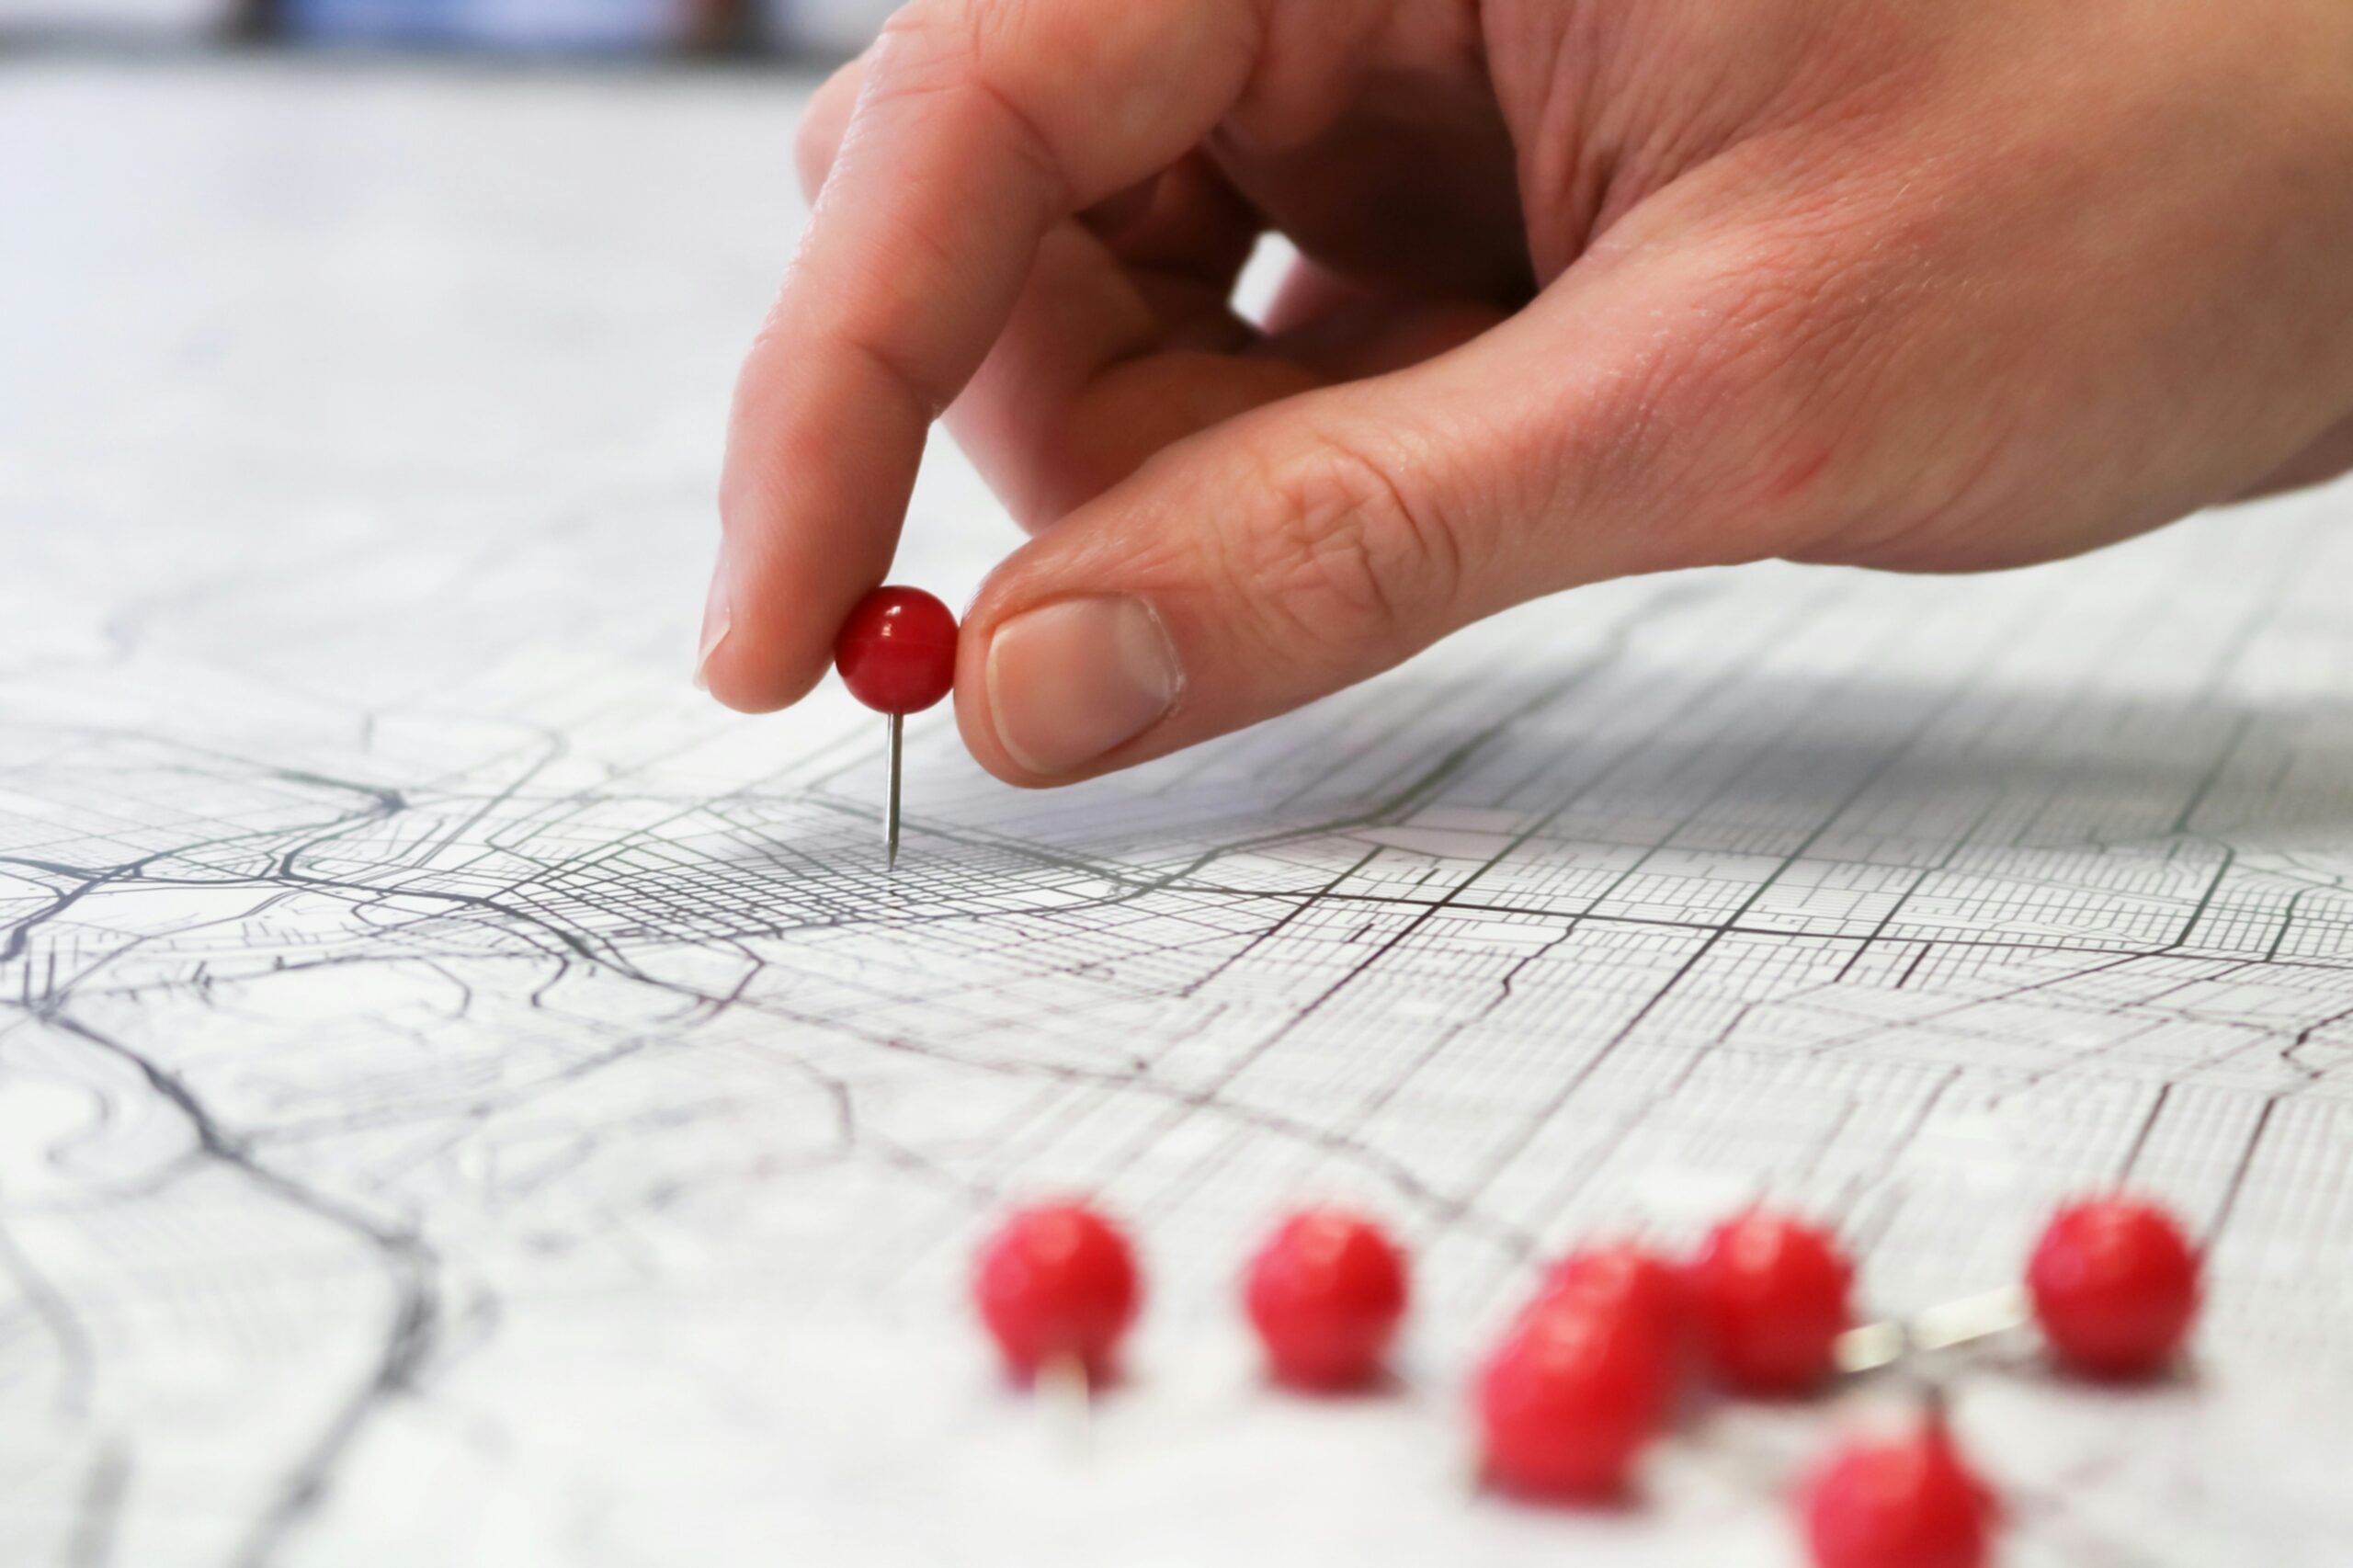 Person placing red push pins into city street map.